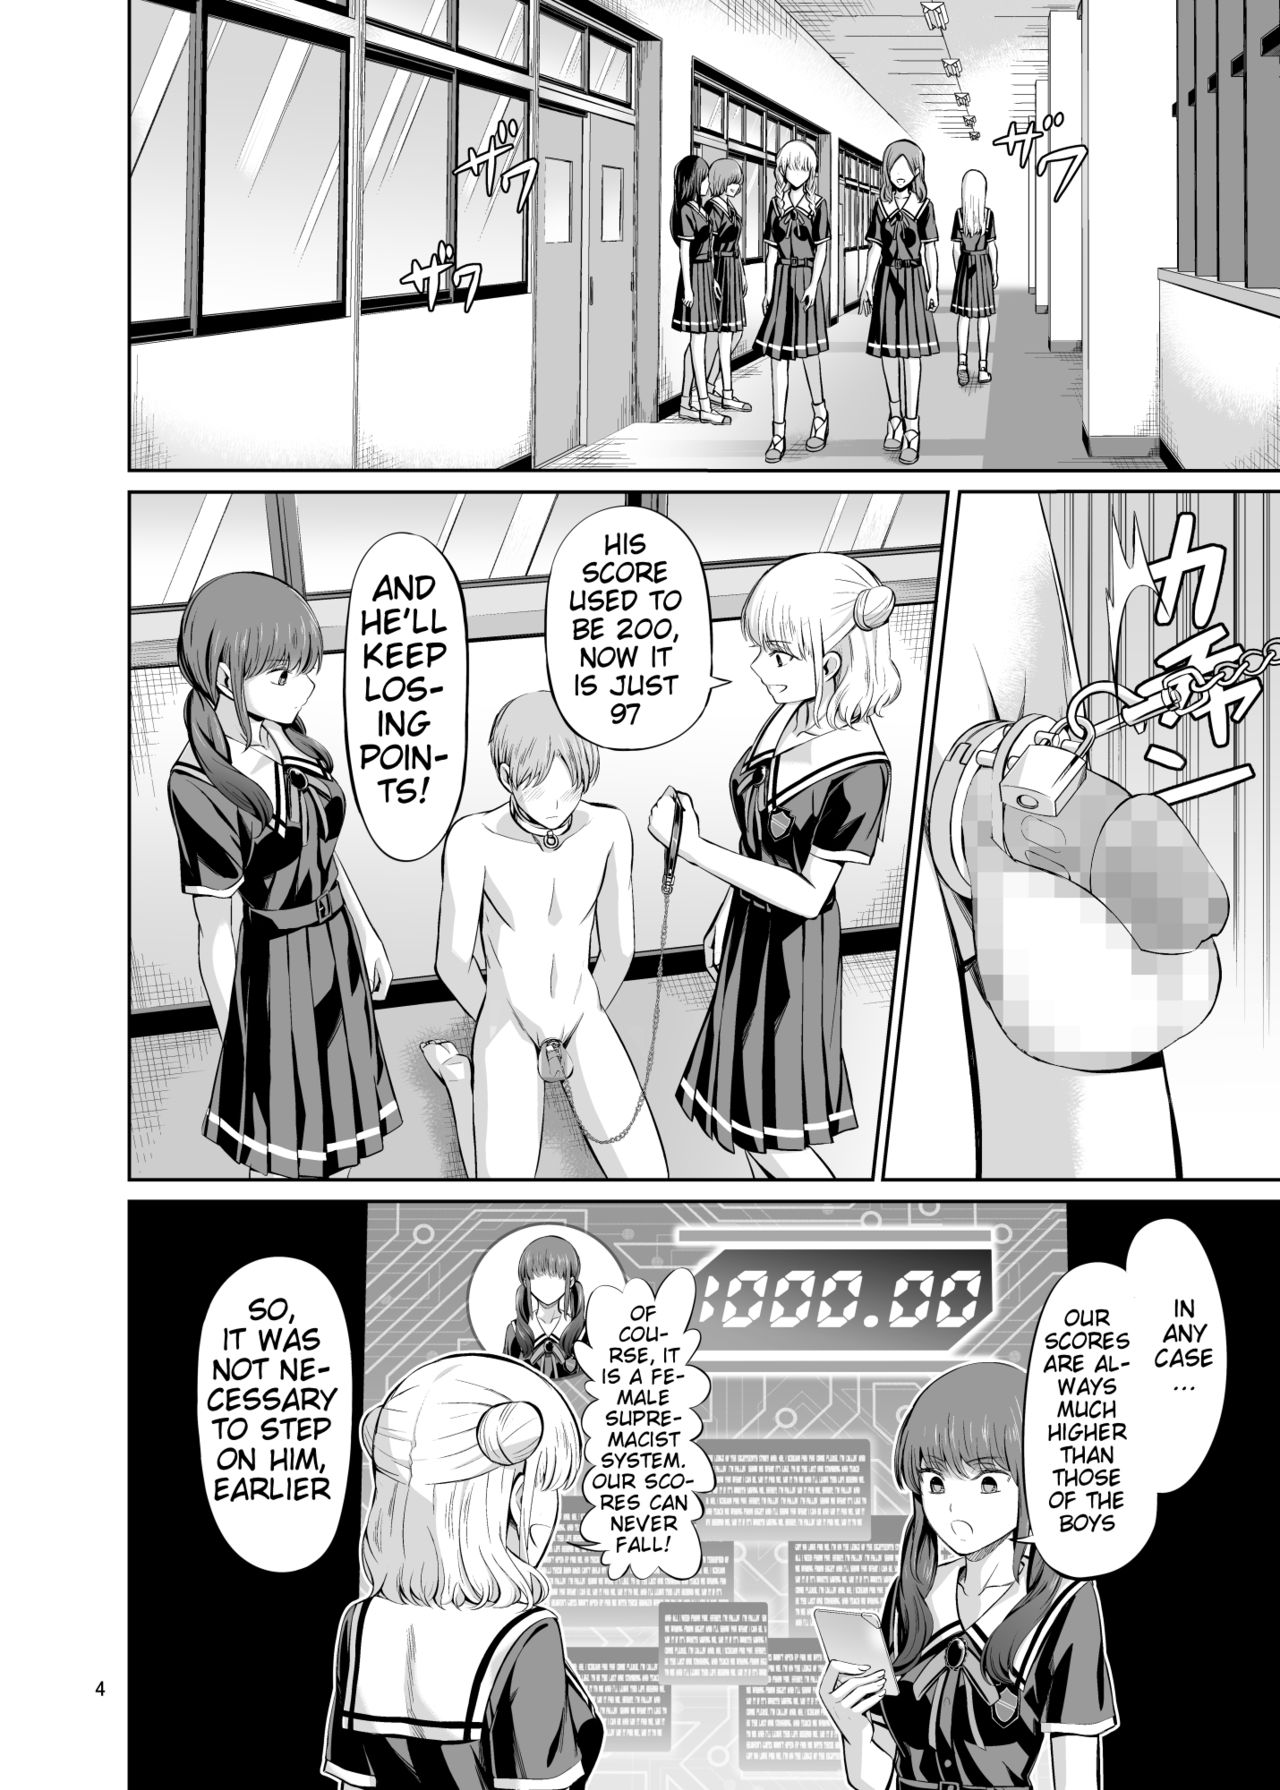 [Yamahata Rian] Tensuushugi no Kuni Kouhen | A Country Based on Point System Sequel [English] [Esoteric_Autist, klow82] page 6 full